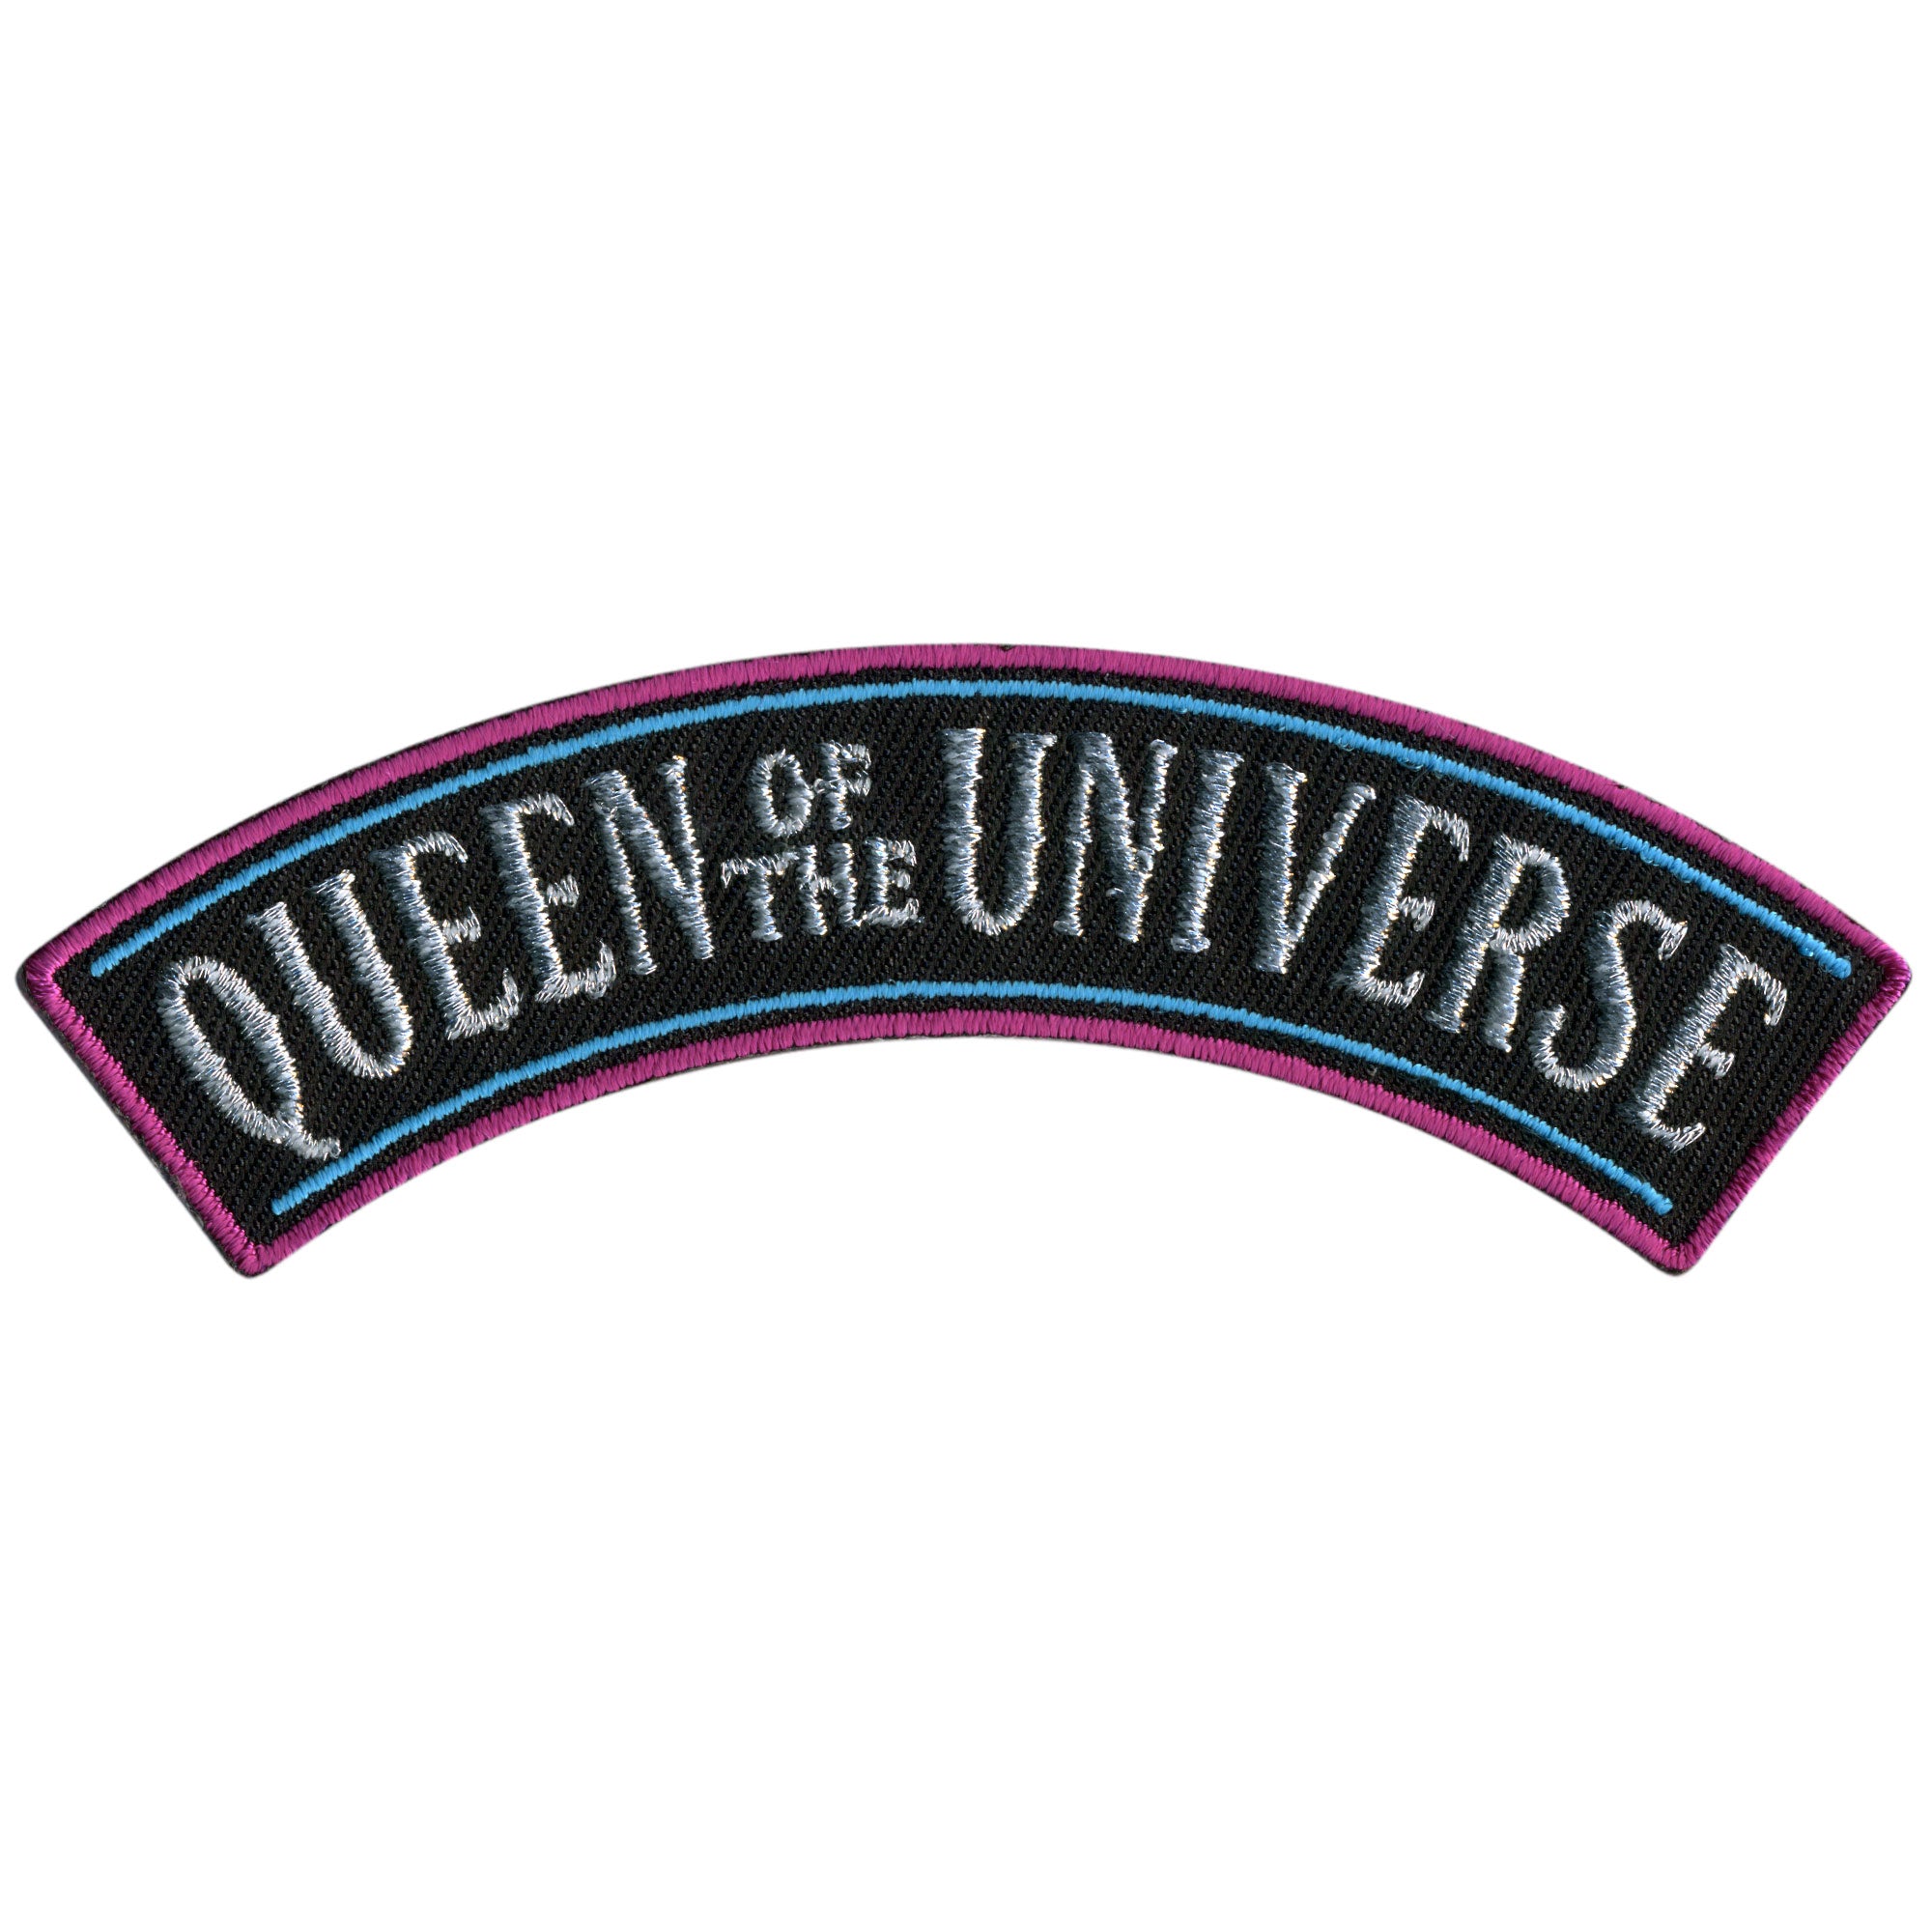 Hot Leathers Queen Of The Universe 4” X 1” Top Rocker Patch